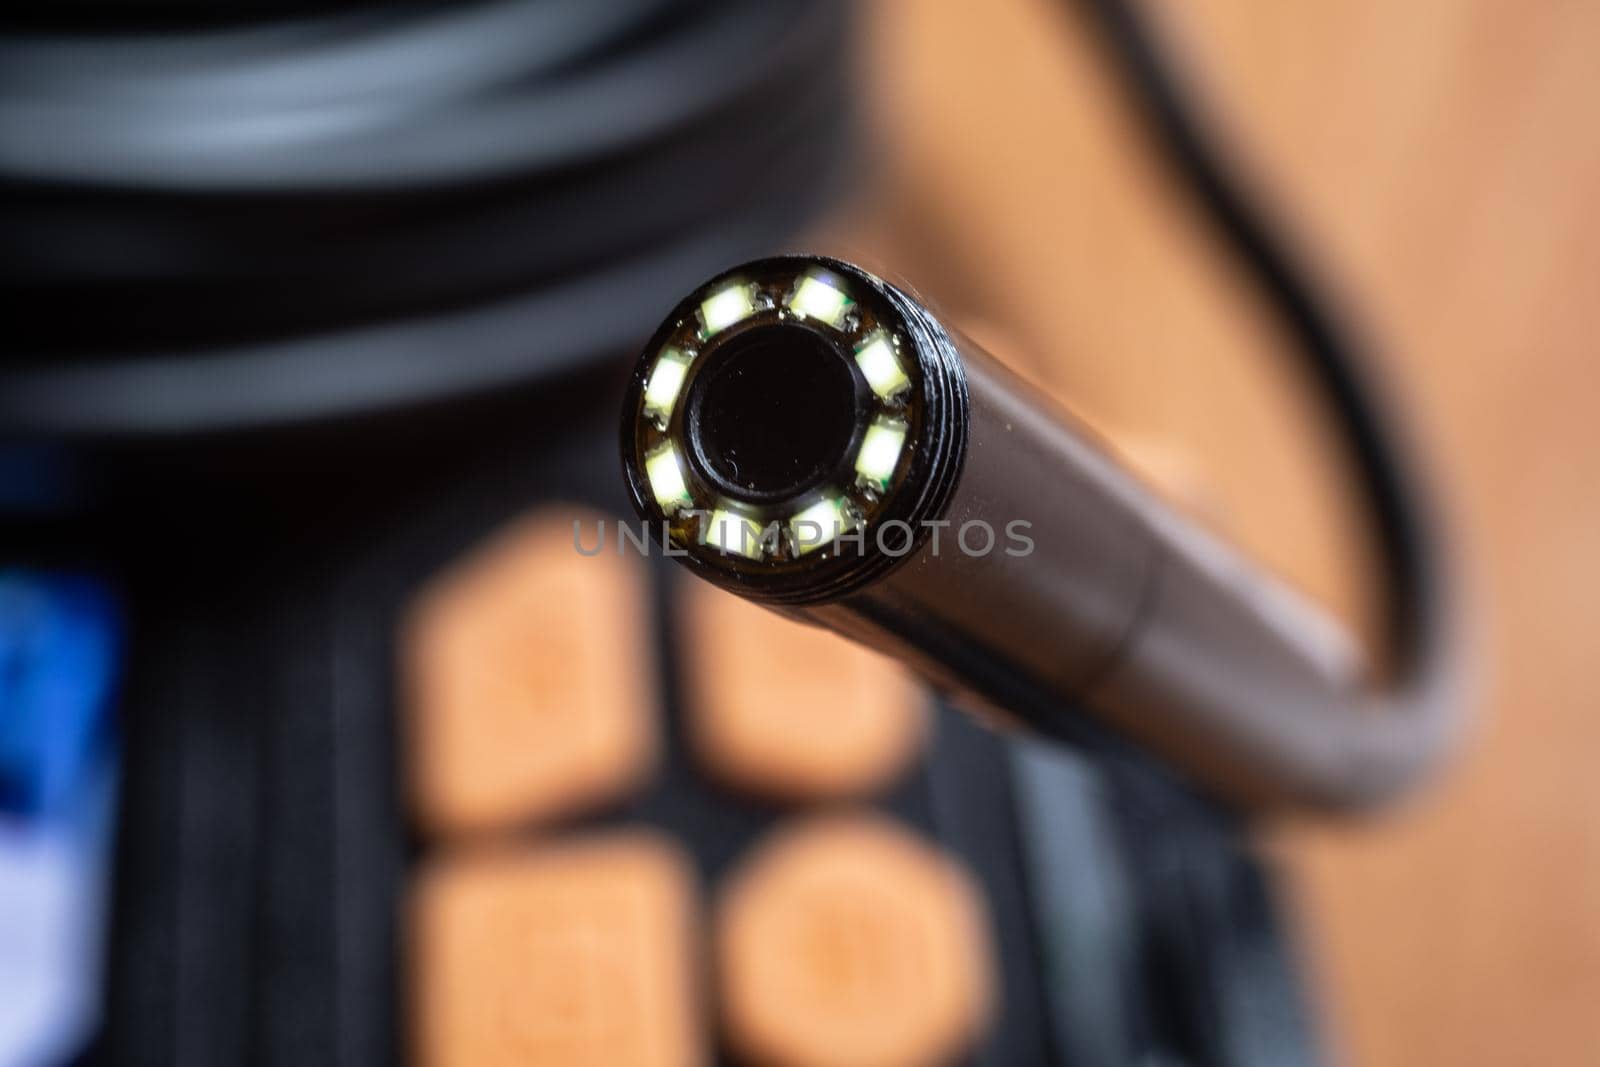 Endoscope camera with LED lights all around